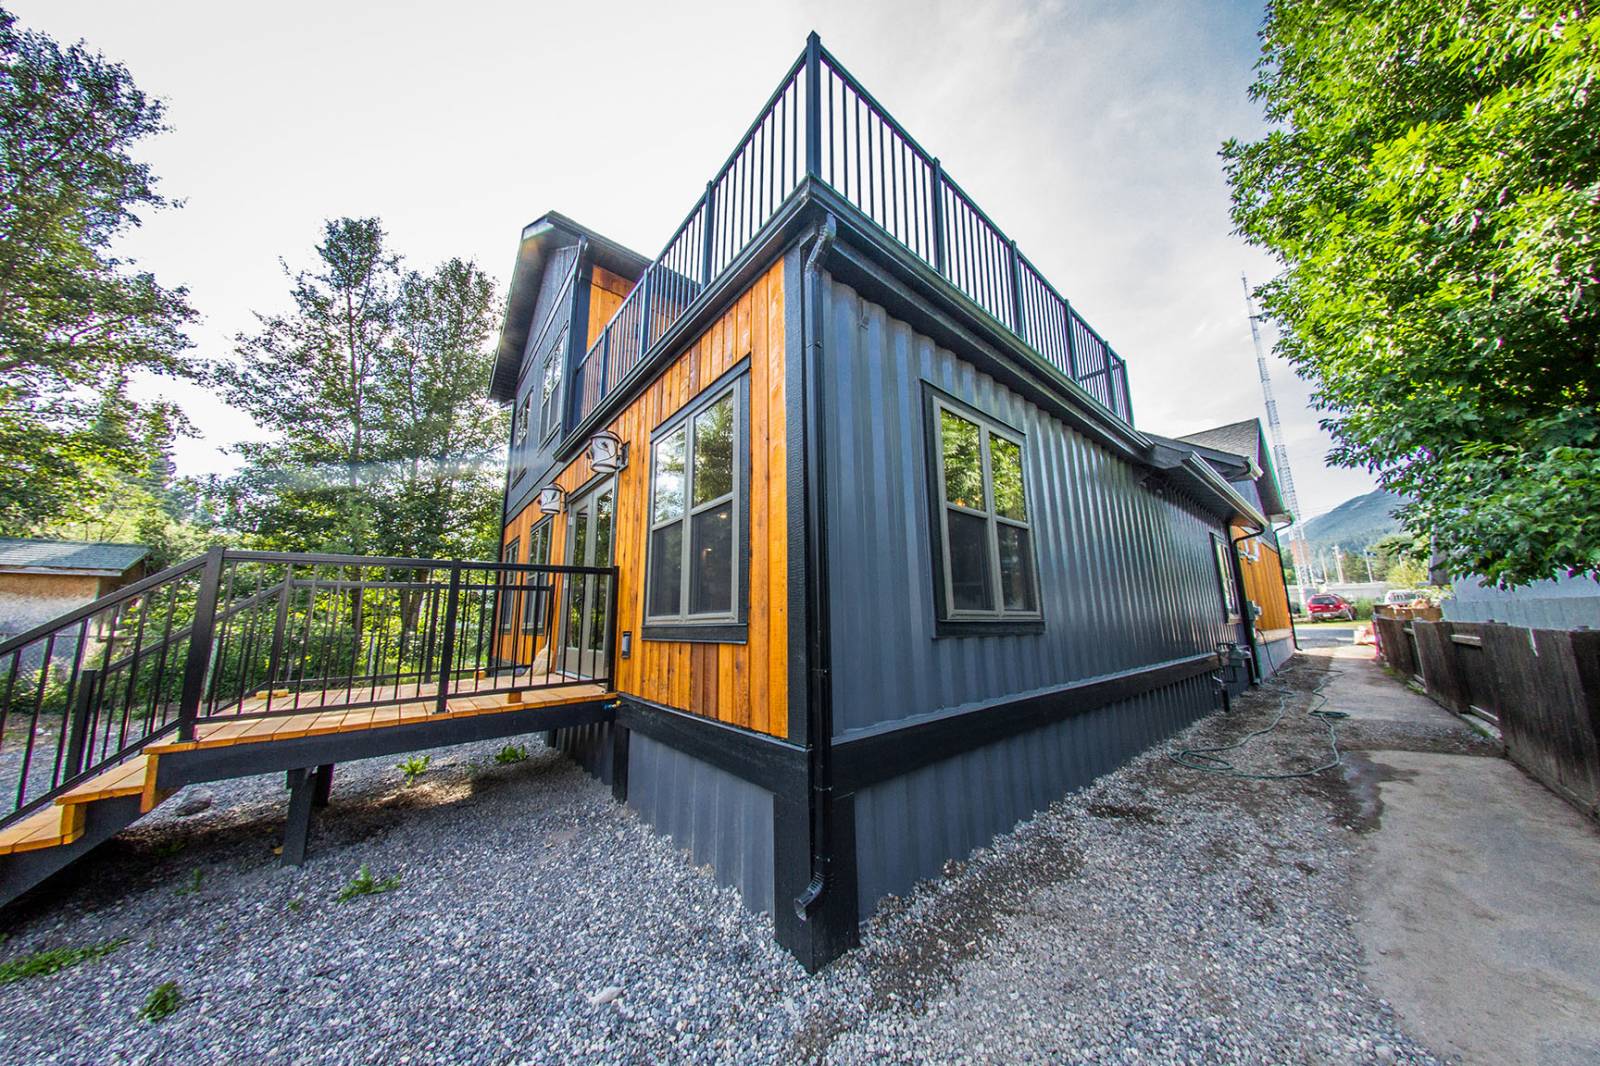 Take a Peek Inside This Gorgeous SeaCan Home from Blocks Container